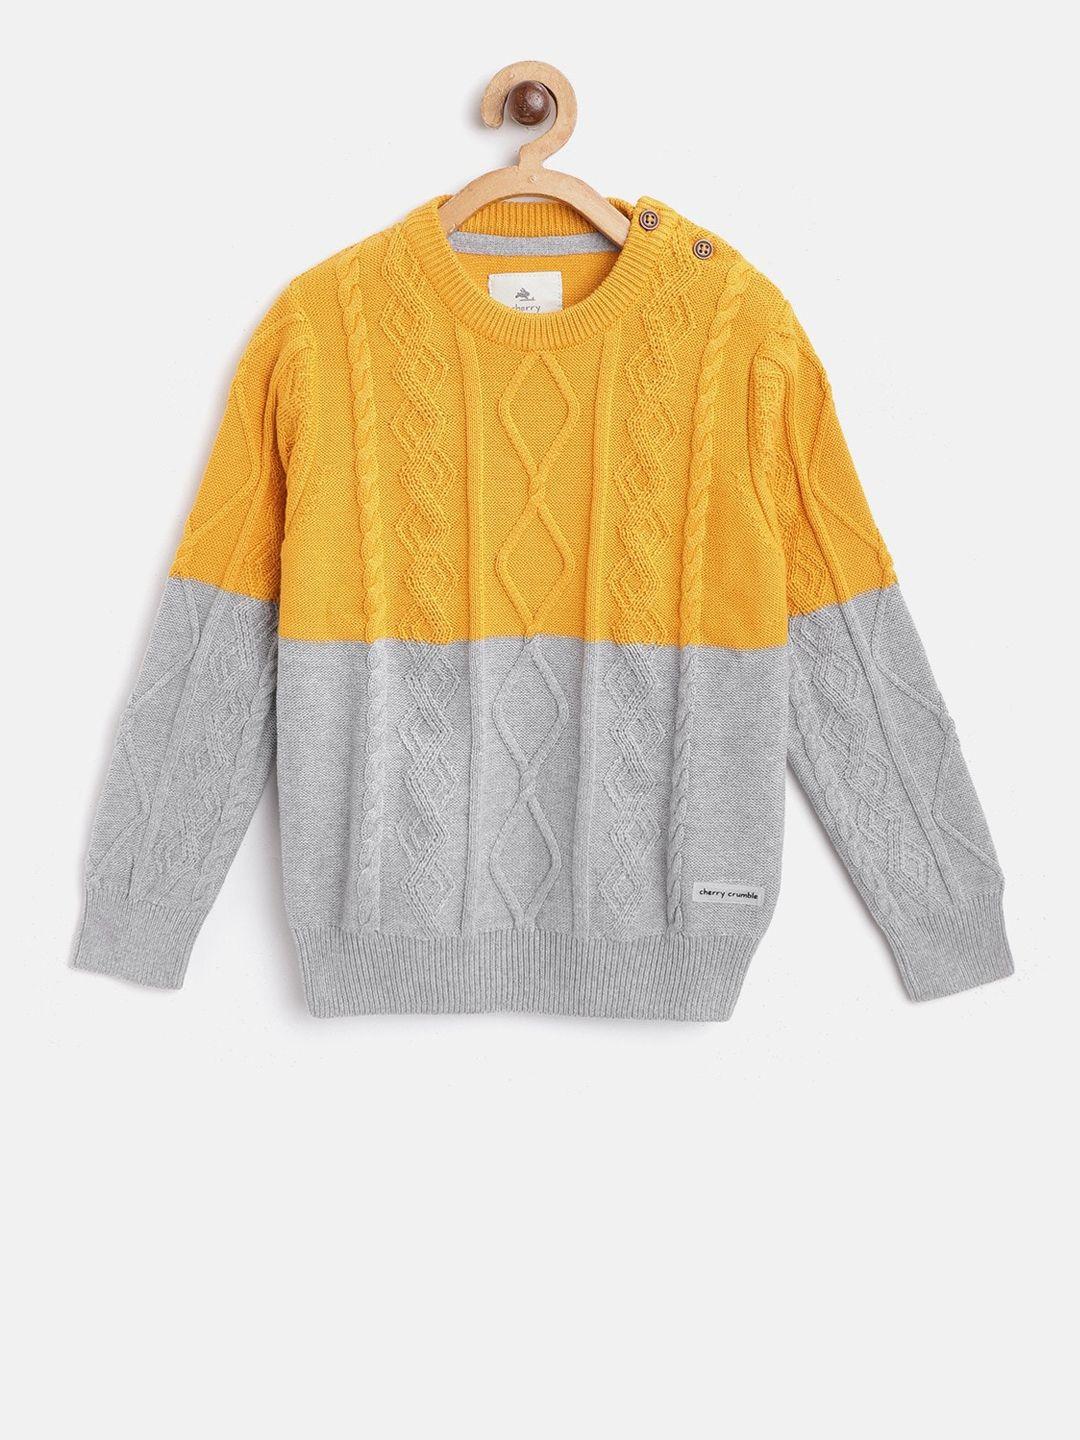 Cherry Crumble Boys and Girls Yellow Cable Knit Mustard Sweater